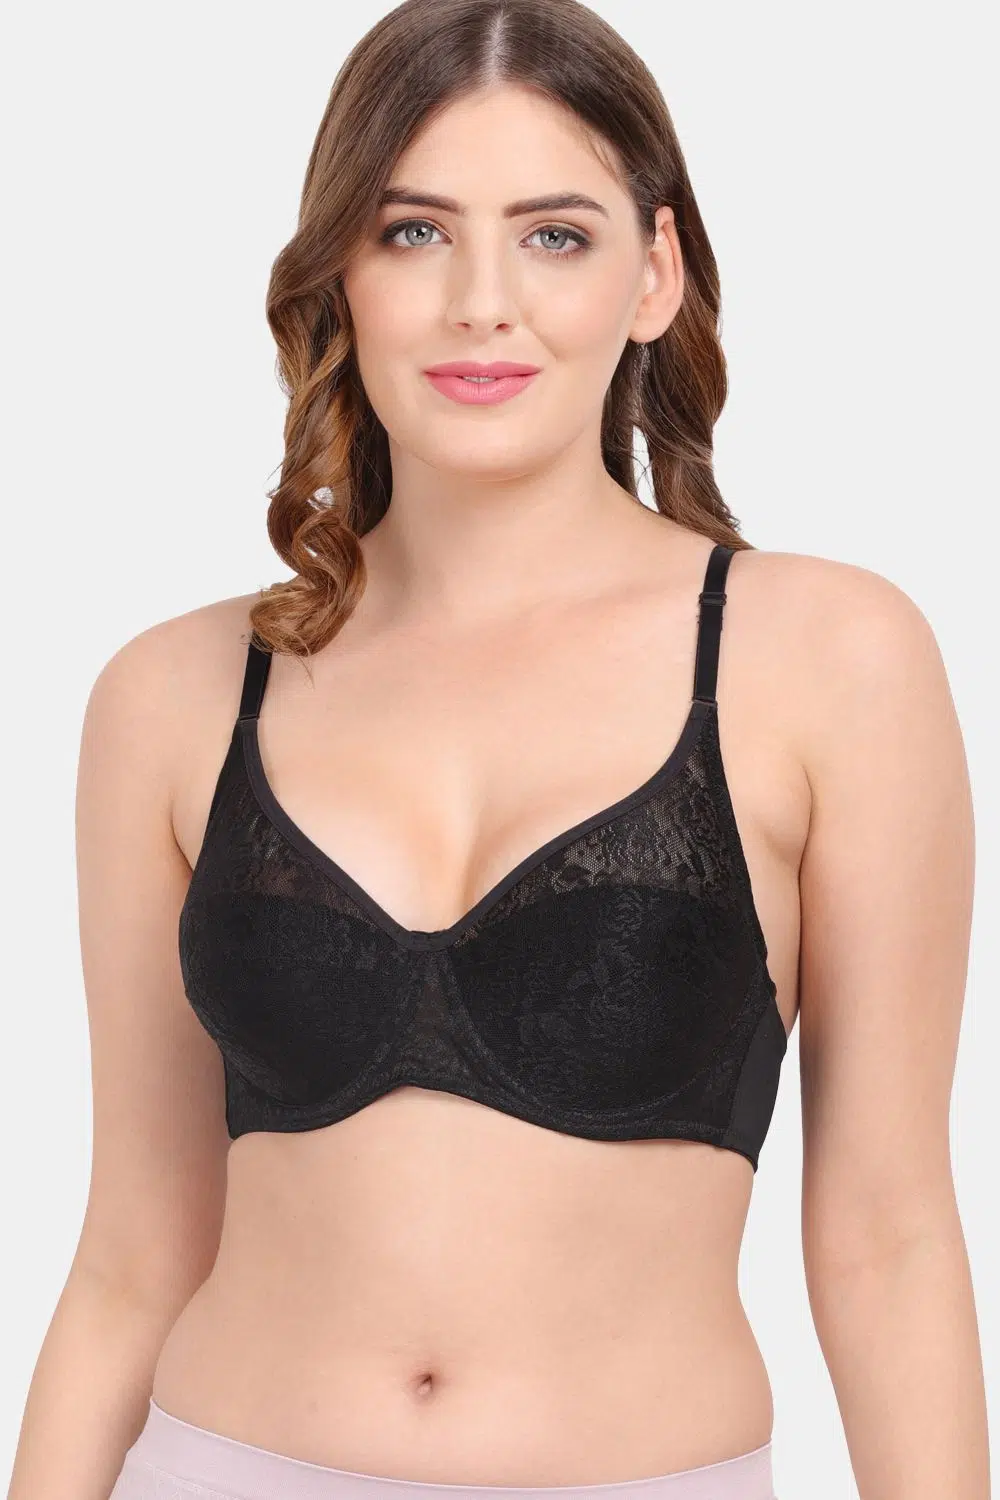 Ladies Black Lace Underwired Non Padded Bra. 32 to 42 & Cup size B to G